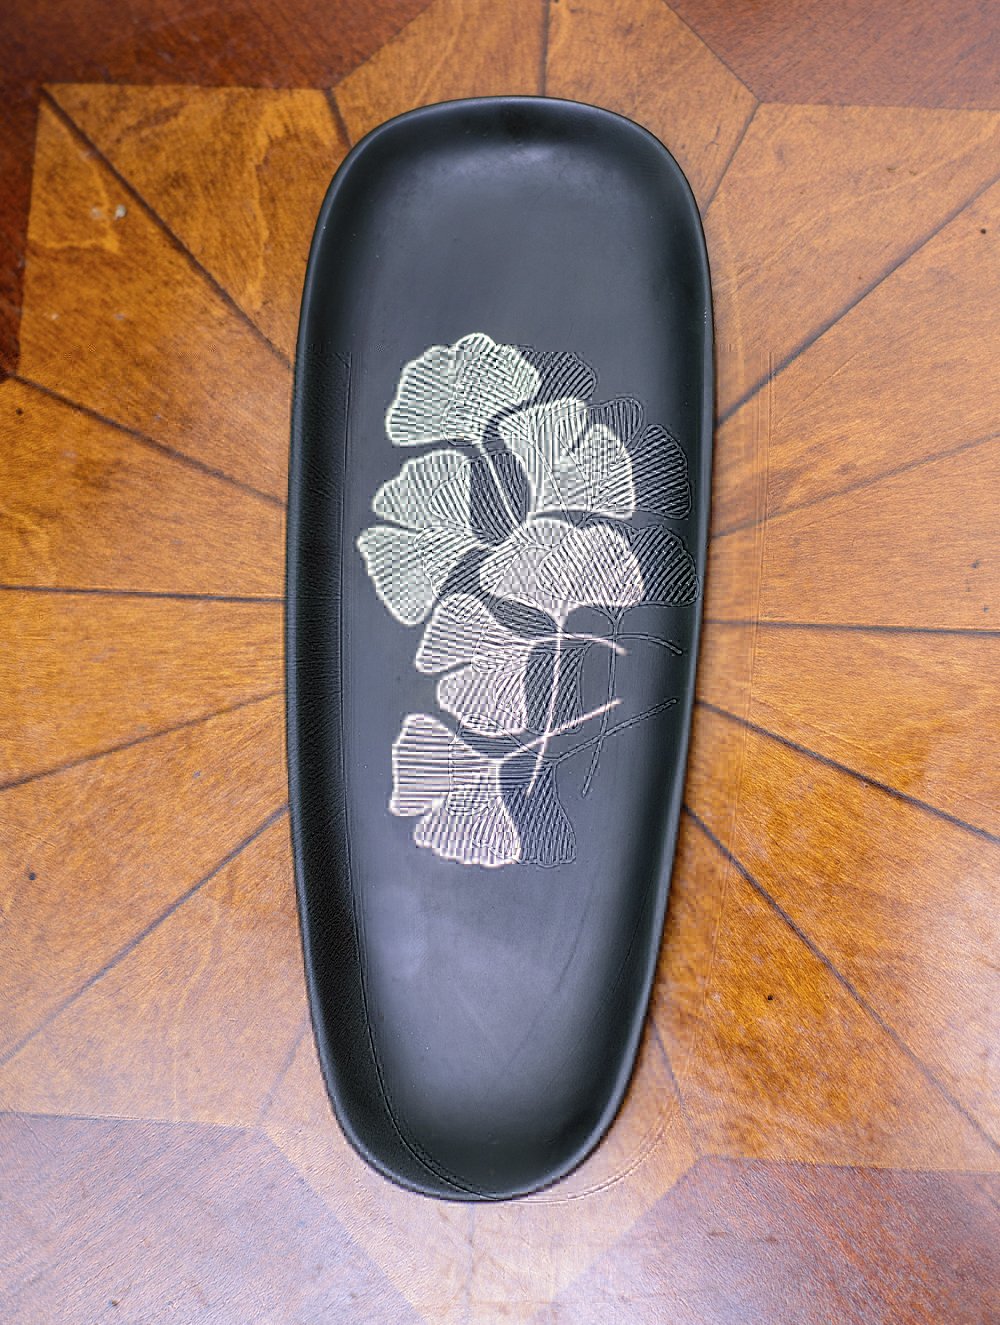 Load image into Gallery viewer, Bidri Craft Flat Tray - Floral